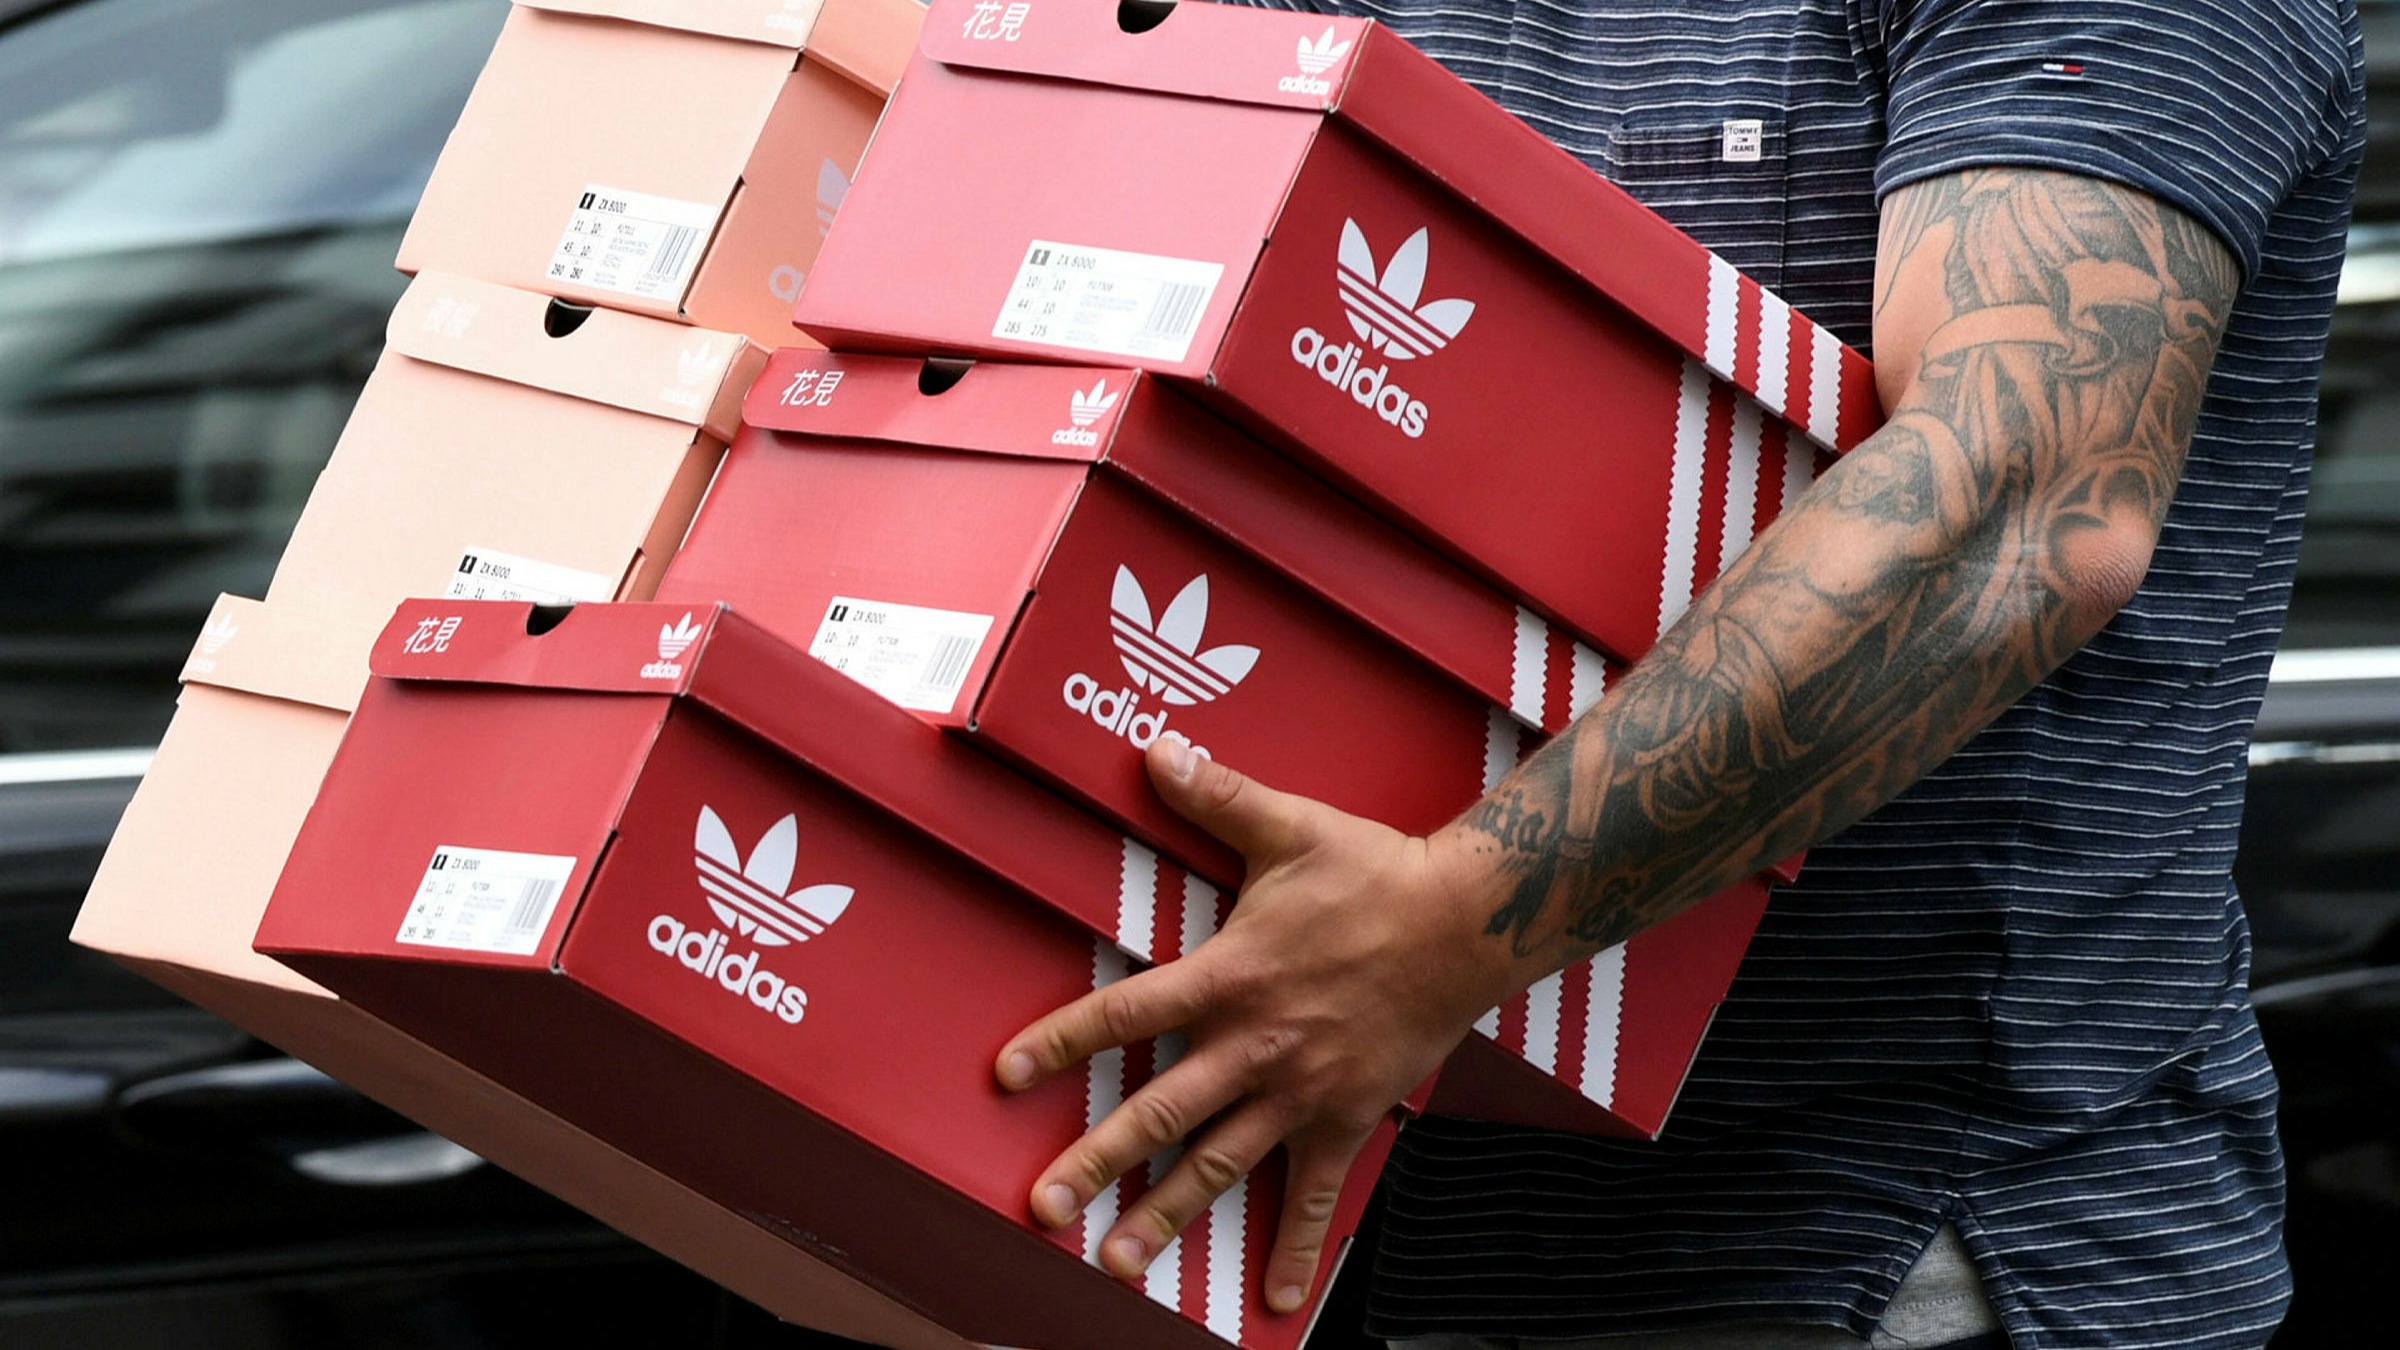 Pandemic supply problems could cost Adidas €500m in sales this year | Financial Times